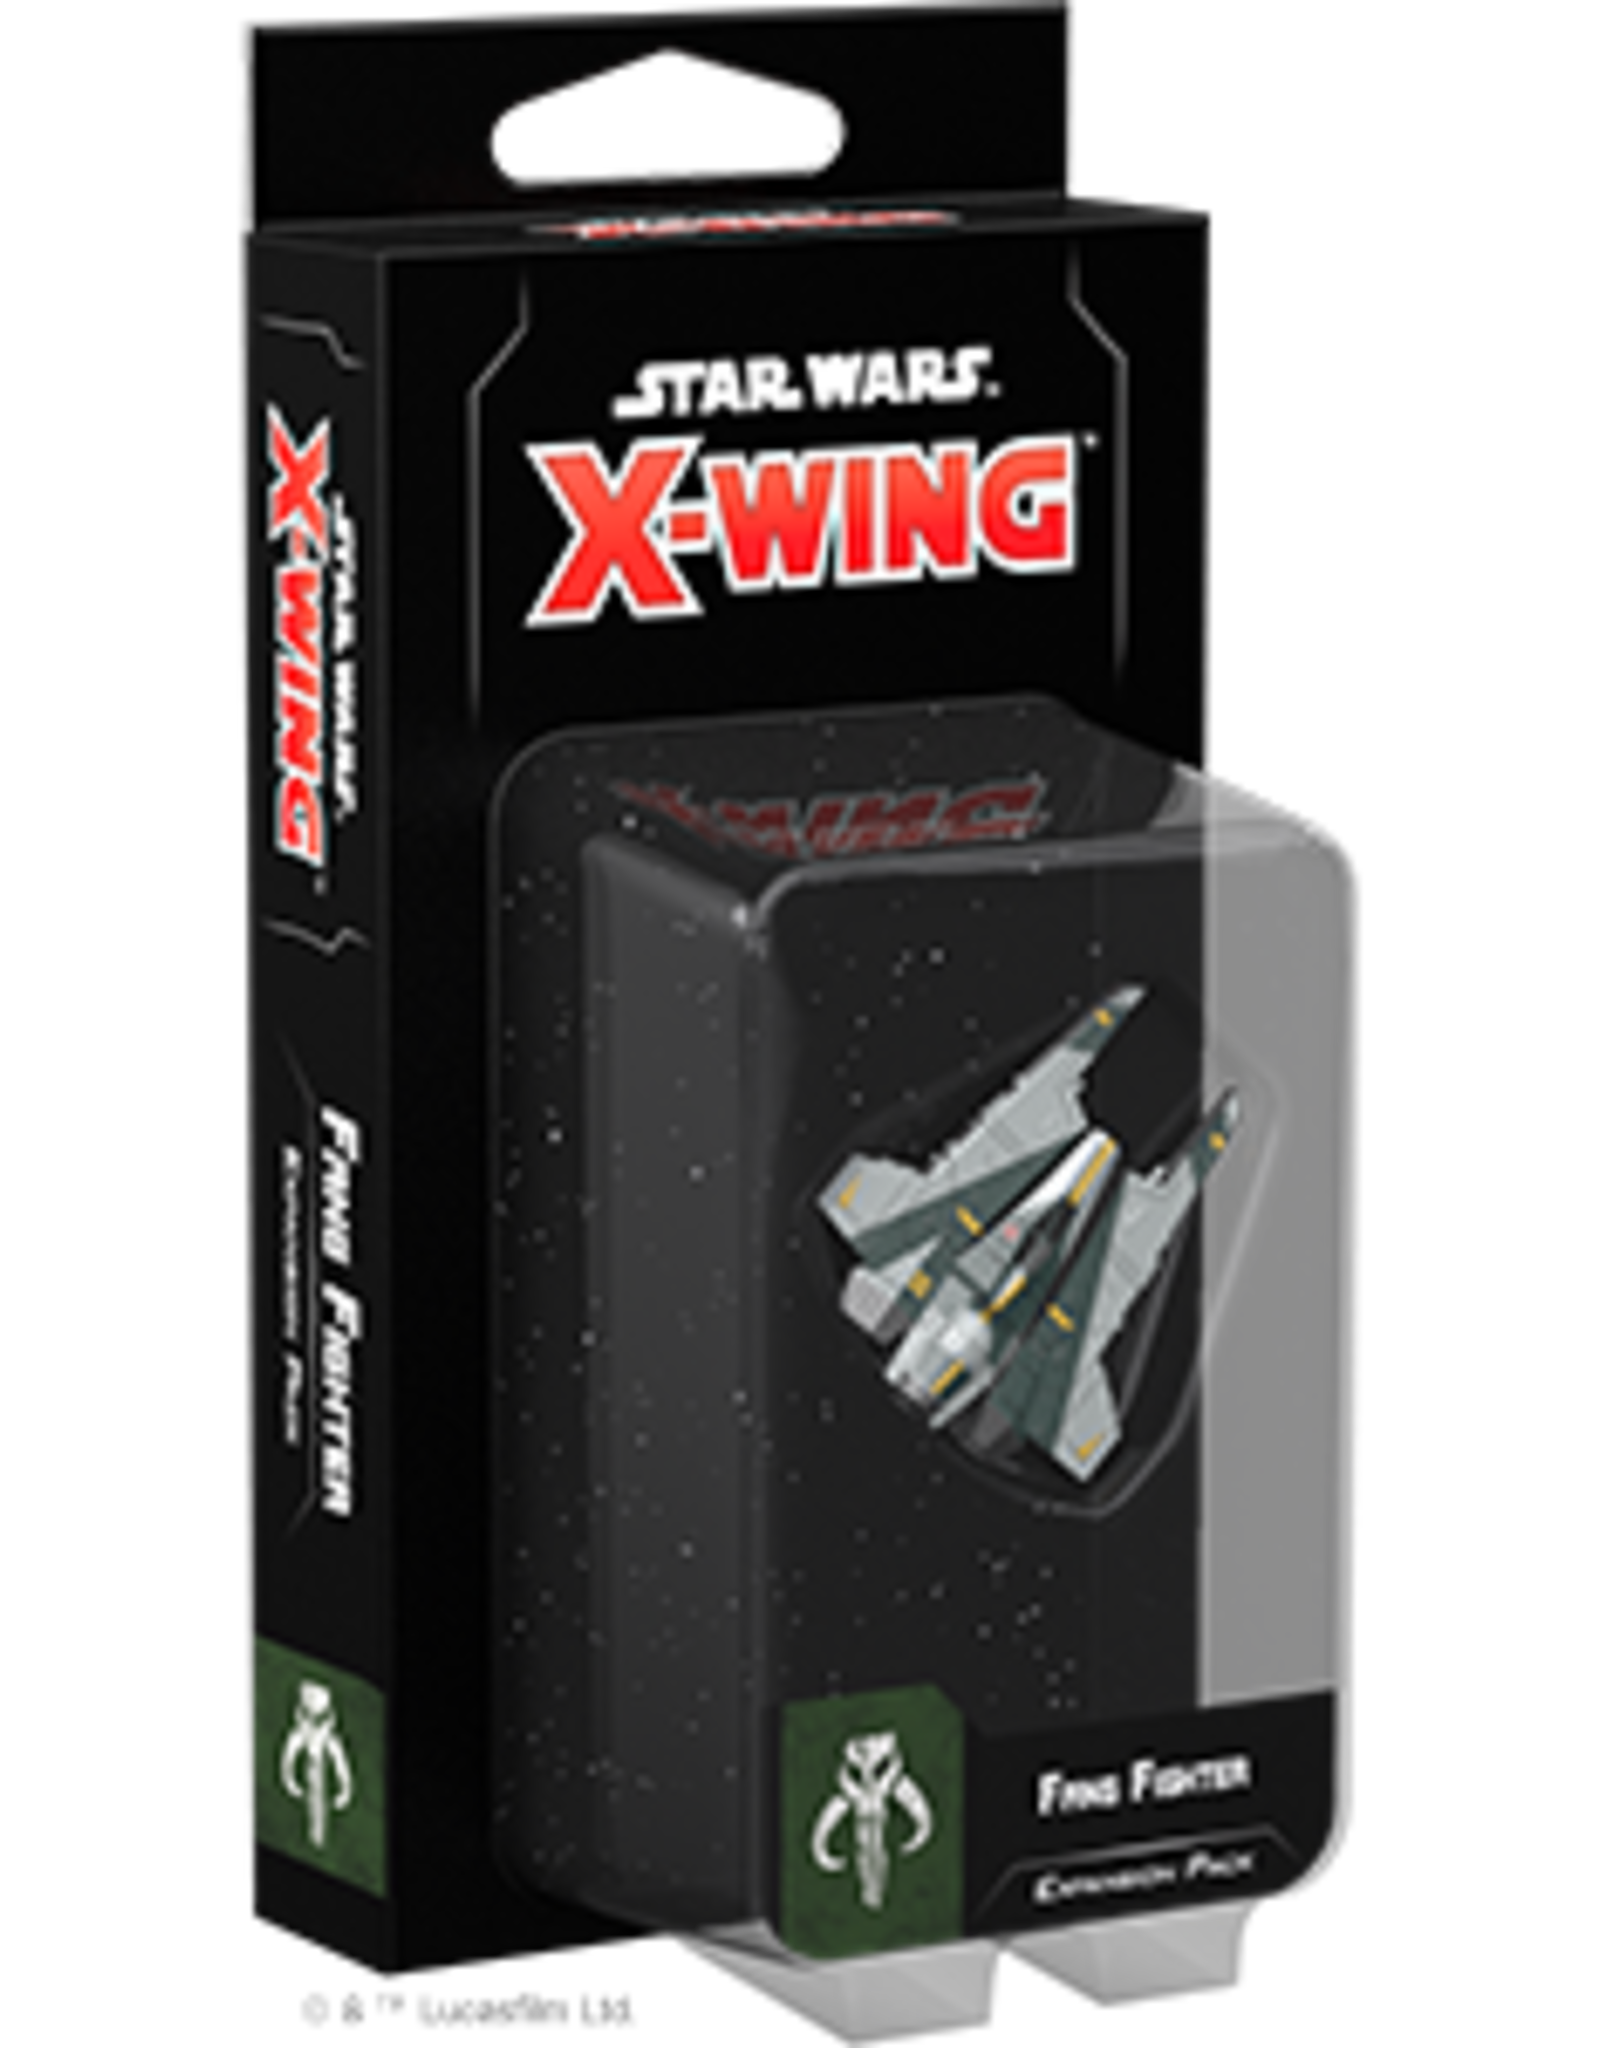 FFG Star Wars X-Wing 2.0: Fang Fighter Expansion Pack